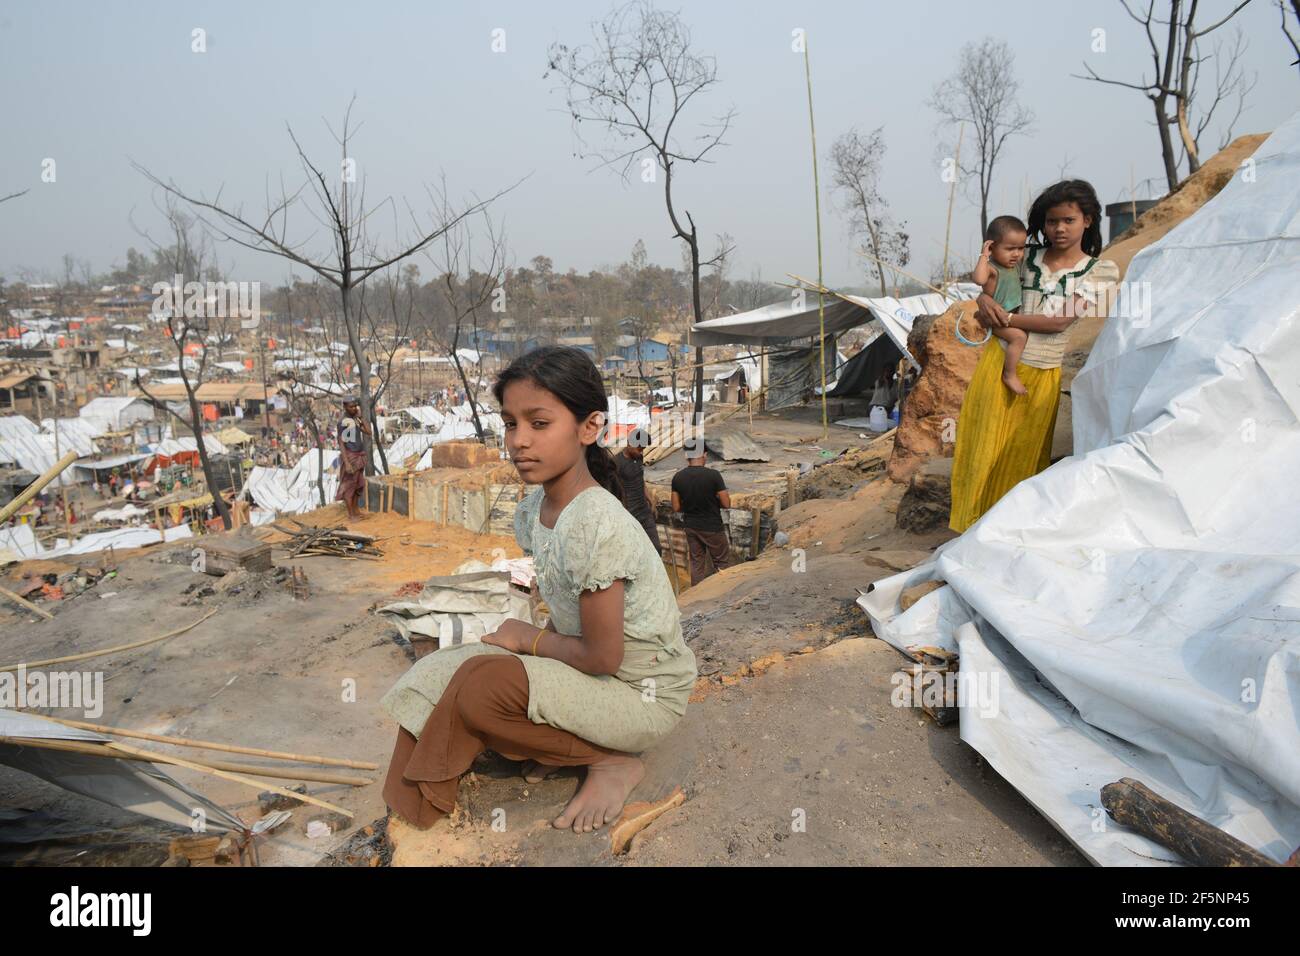 A girl seating beside her temporary shelters set up for displaced Rohingya refugees days after a fire at a refugee camp in Ukhia, in the southeastern Stock Photo